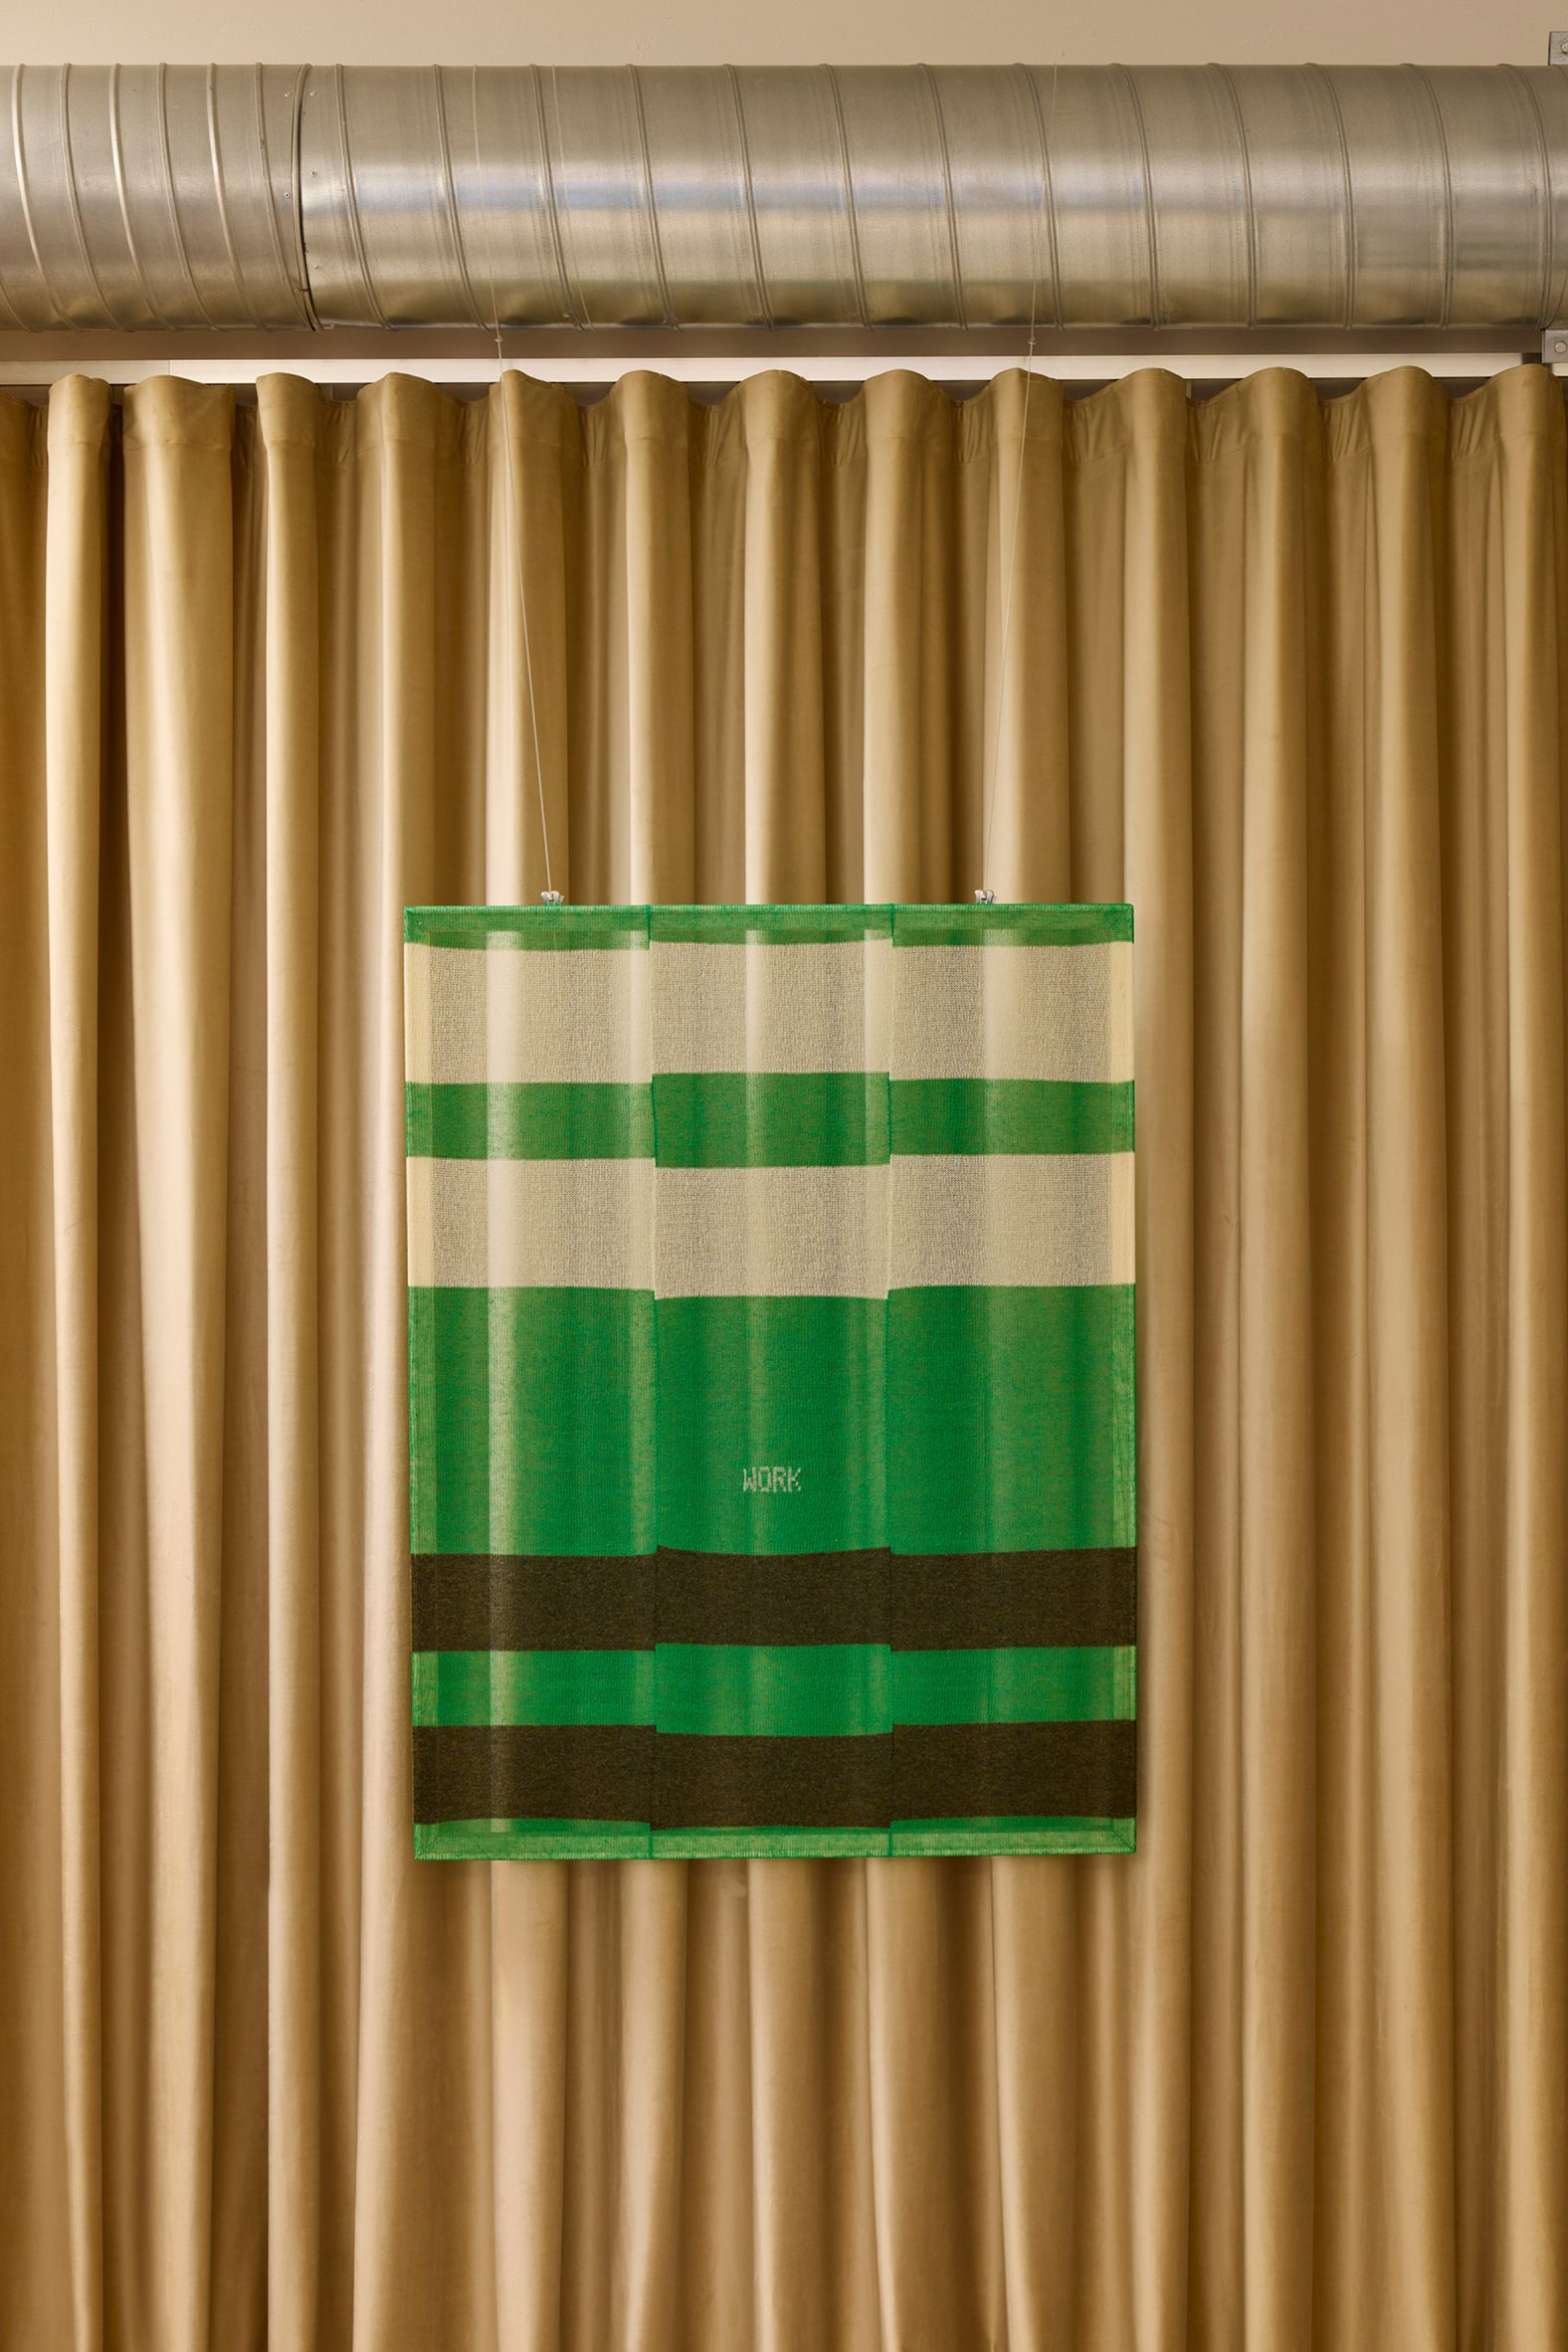 Green, brown and neutral-hued textile "painting"